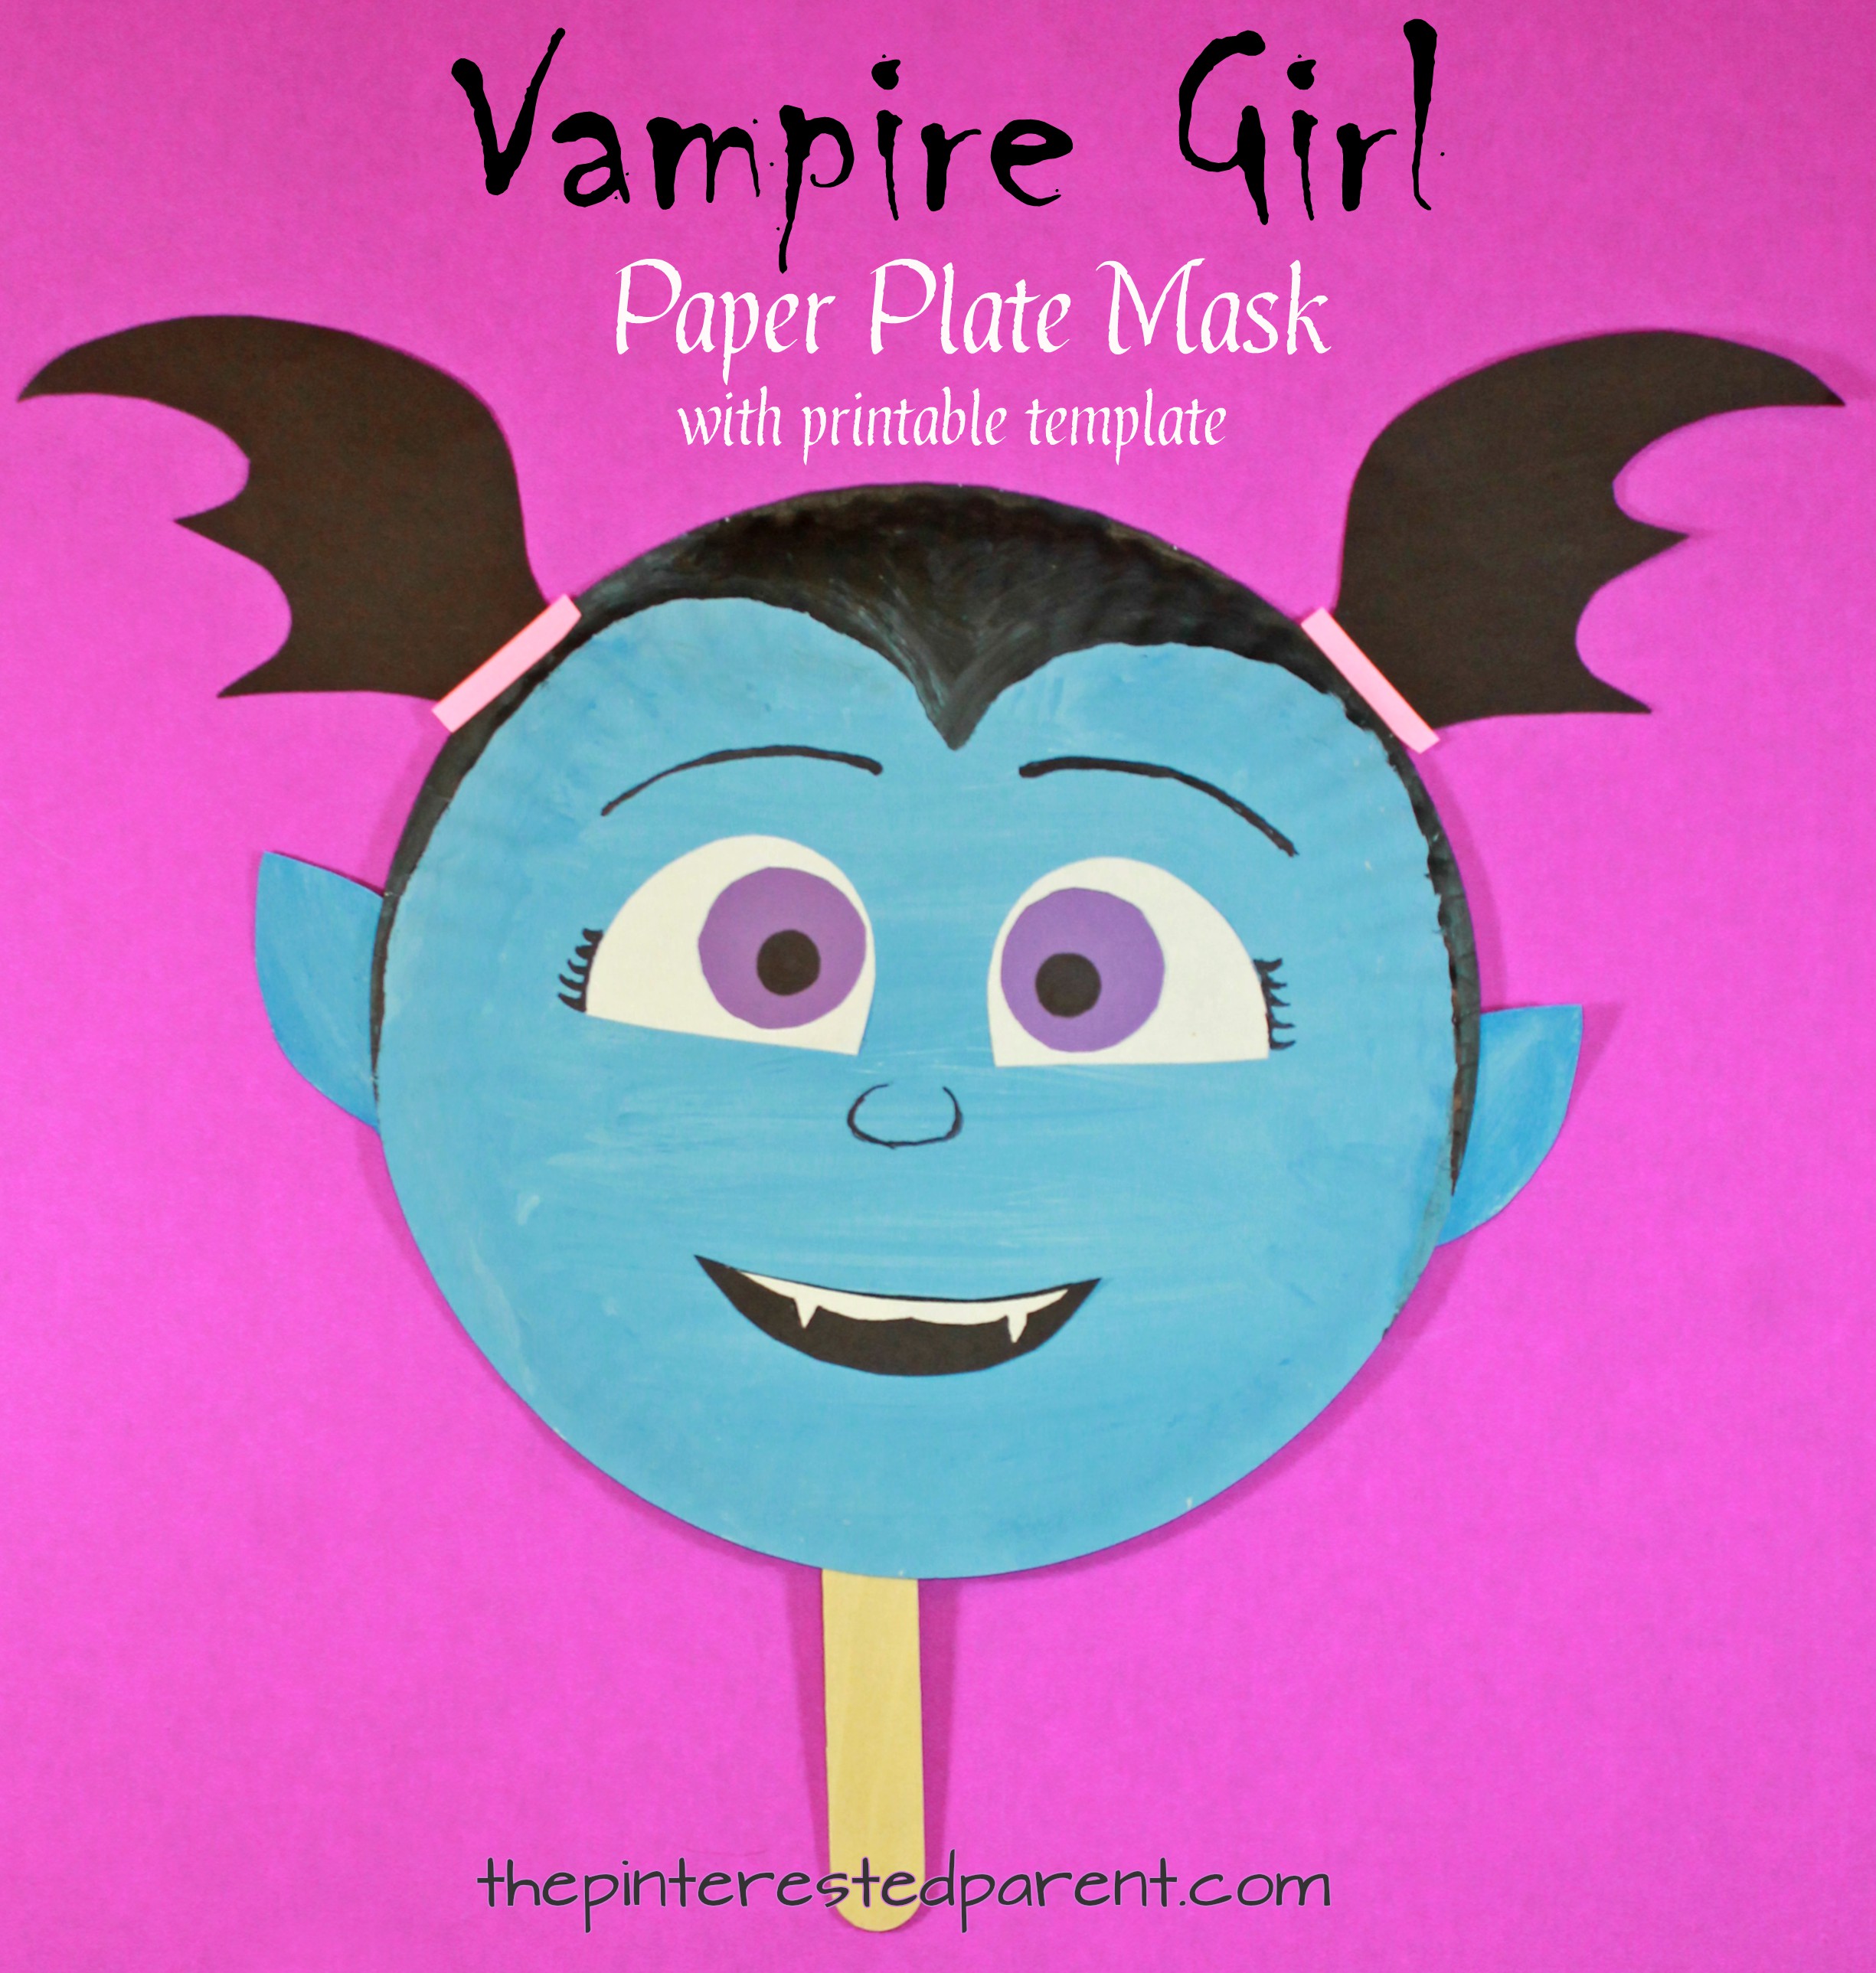 Vampirina inspired vampire girl paper plate mask with free printable template. Arts and crafts for kids. Perfect for Halloween or for pretend play.